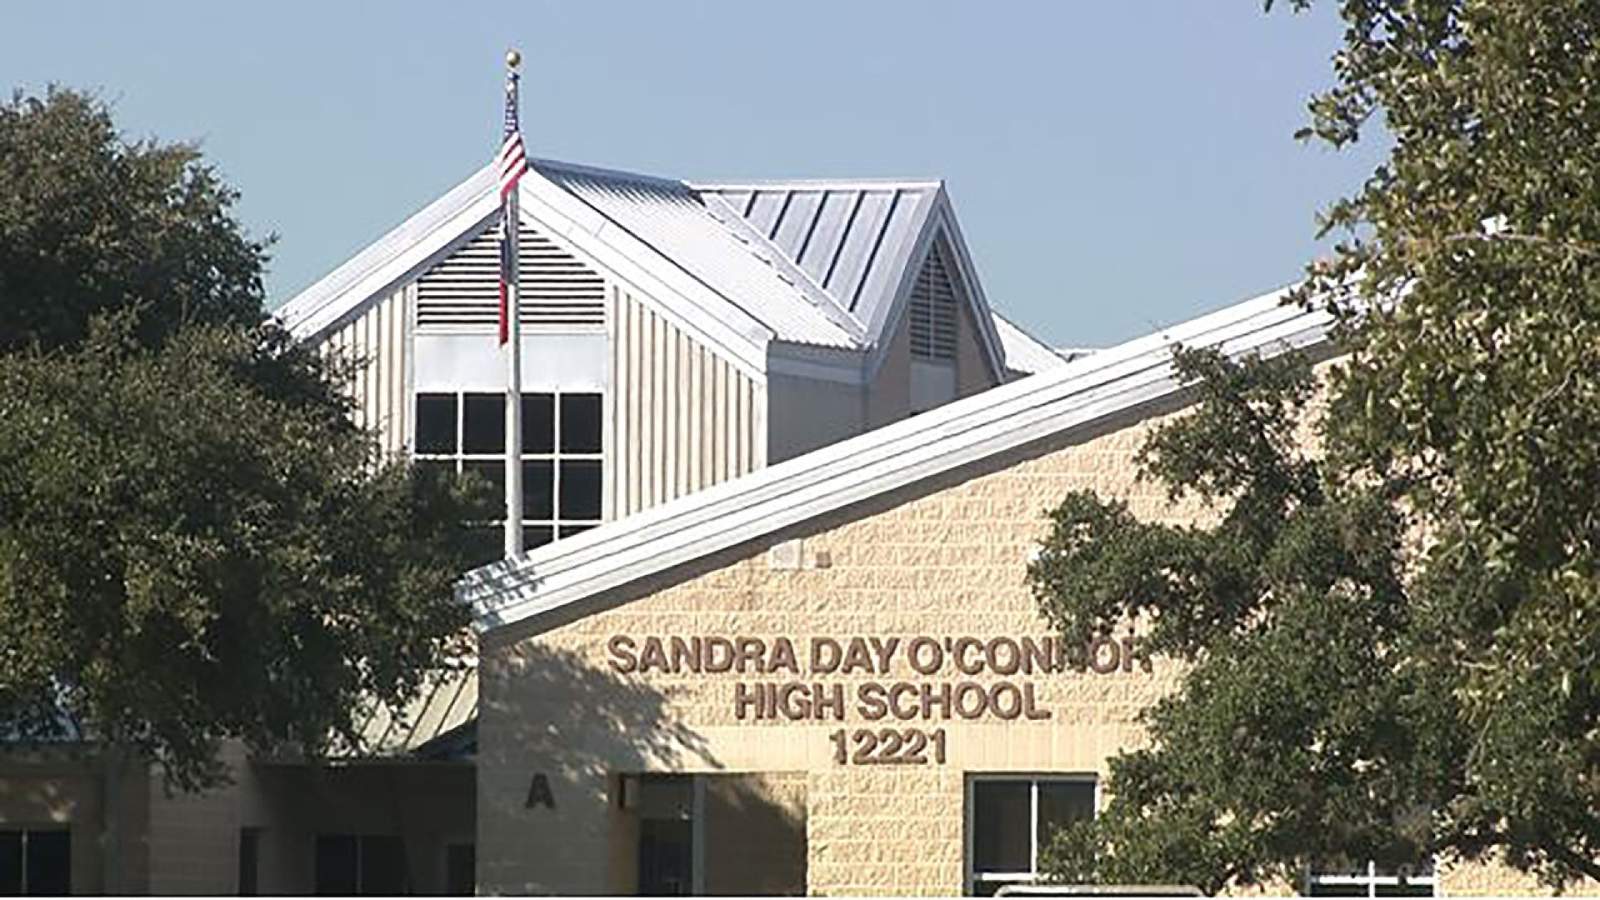 16-year-old student taken into custody after weapon found on Northside ISD campus